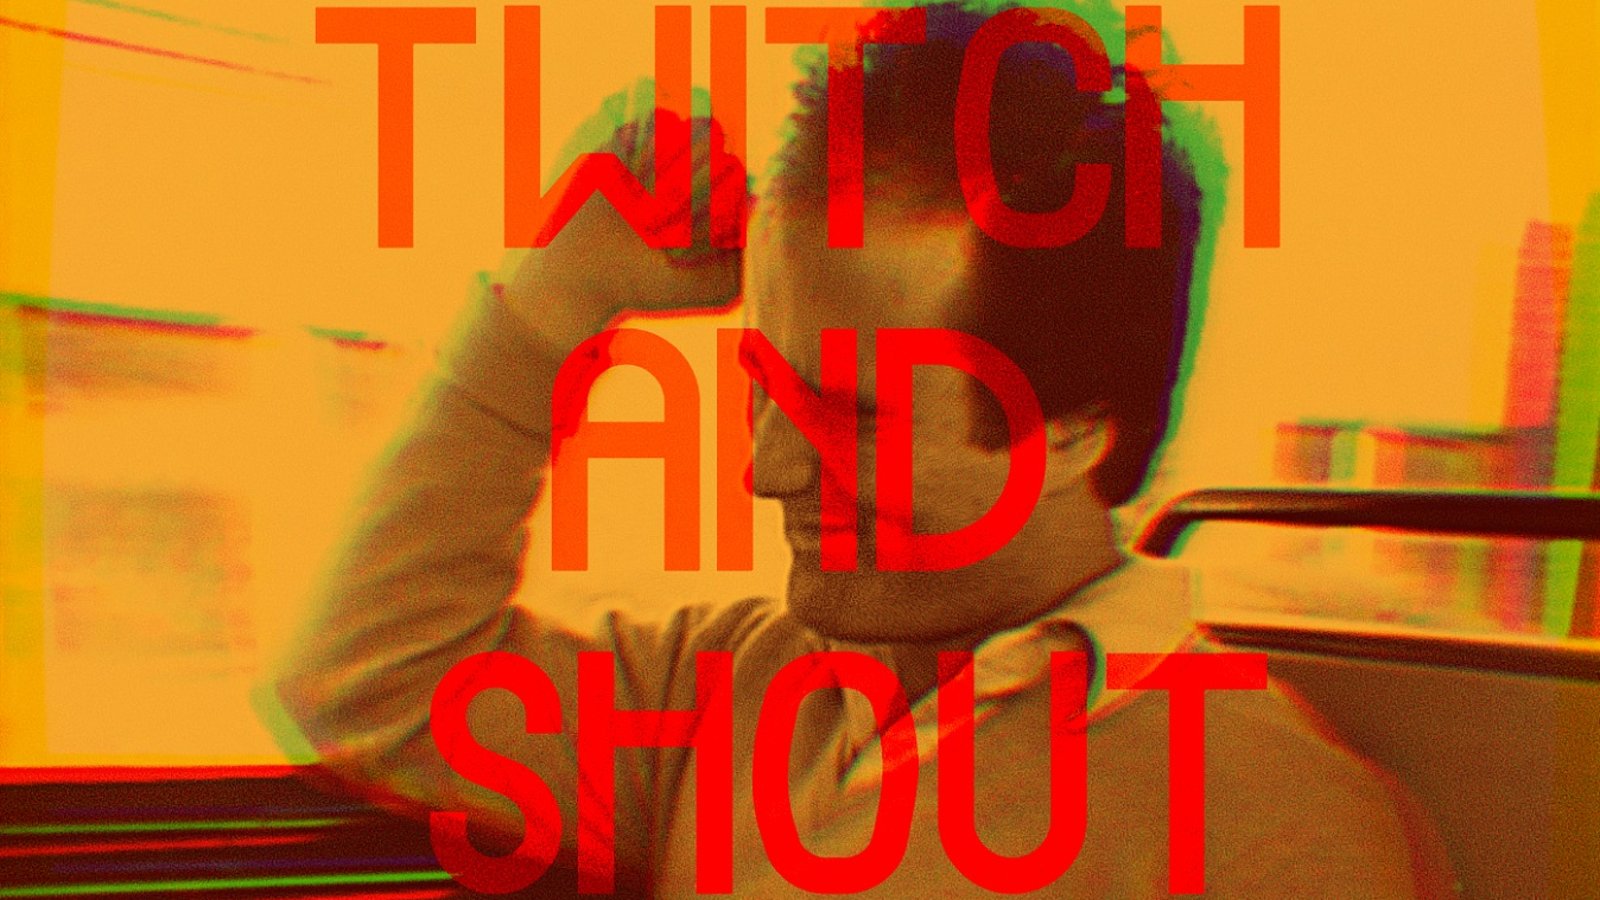 Twitch and Shout: Coping with Tourette's Syndrome